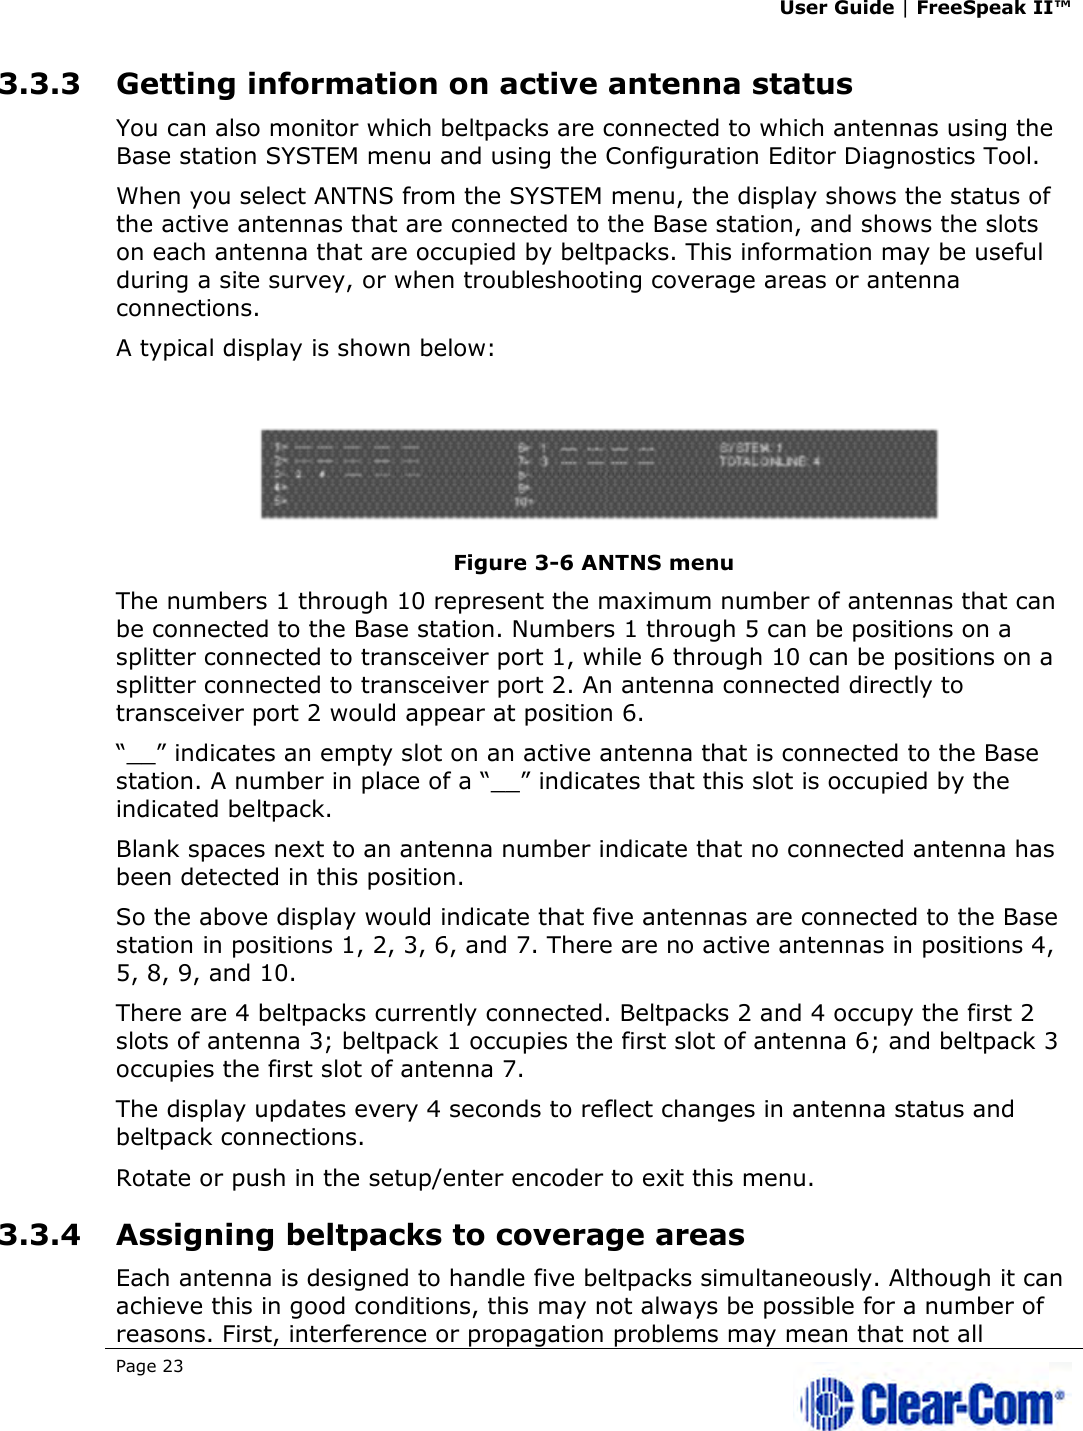 User Guide | FreeSpeak II™  Page 23   3.3.3 Getting information on active antenna status  You can also monitor which beltpacks are connected to which antennas using the Base station SYSTEM menu and using the Configuration Editor Diagnostics Tool. When you select ANTNS from the SYSTEM menu, the display shows the status of the active antennas that are connected to the Base station, and shows the slots on each antenna that are occupied by beltpacks. This information may be useful during a site survey, or when troubleshooting coverage areas or antenna connections.  A typical display is shown below:  Figure 3-6 ANTNS menu  The numbers 1 through 10 represent the maximum number of antennas that can be connected to the Base station. Numbers 1 through 5 can be positions on a splitter connected to transceiver port 1, while 6 through 10 can be positions on a splitter connected to transceiver port 2. An antenna connected directly to transceiver port 2 would appear at position 6.  “__” indicates an empty slot on an active antenna that is connected to the Base station. A number in place of a “__” indicates that this slot is occupied by the indicated beltpack.  Blank spaces next to an antenna number indicate that no connected antenna has been detected in this position.  So the above display would indicate that five antennas are connected to the Base station in positions 1, 2, 3, 6, and 7. There are no active antennas in positions 4, 5, 8, 9, and 10.  There are 4 beltpacks currently connected. Beltpacks 2 and 4 occupy the first 2 slots of antenna 3; beltpack 1 occupies the first slot of antenna 6; and beltpack 3 occupies the first slot of antenna 7.  The display updates every 4 seconds to reflect changes in antenna status and beltpack connections.  Rotate or push in the setup/enter encoder to exit this menu. 3.3.4 Assigning beltpacks to coverage areas Each antenna is designed to handle five beltpacks simultaneously. Although it can achieve this in good conditions, this may not always be possible for a number of reasons. First, interference or propagation problems may mean that not all 